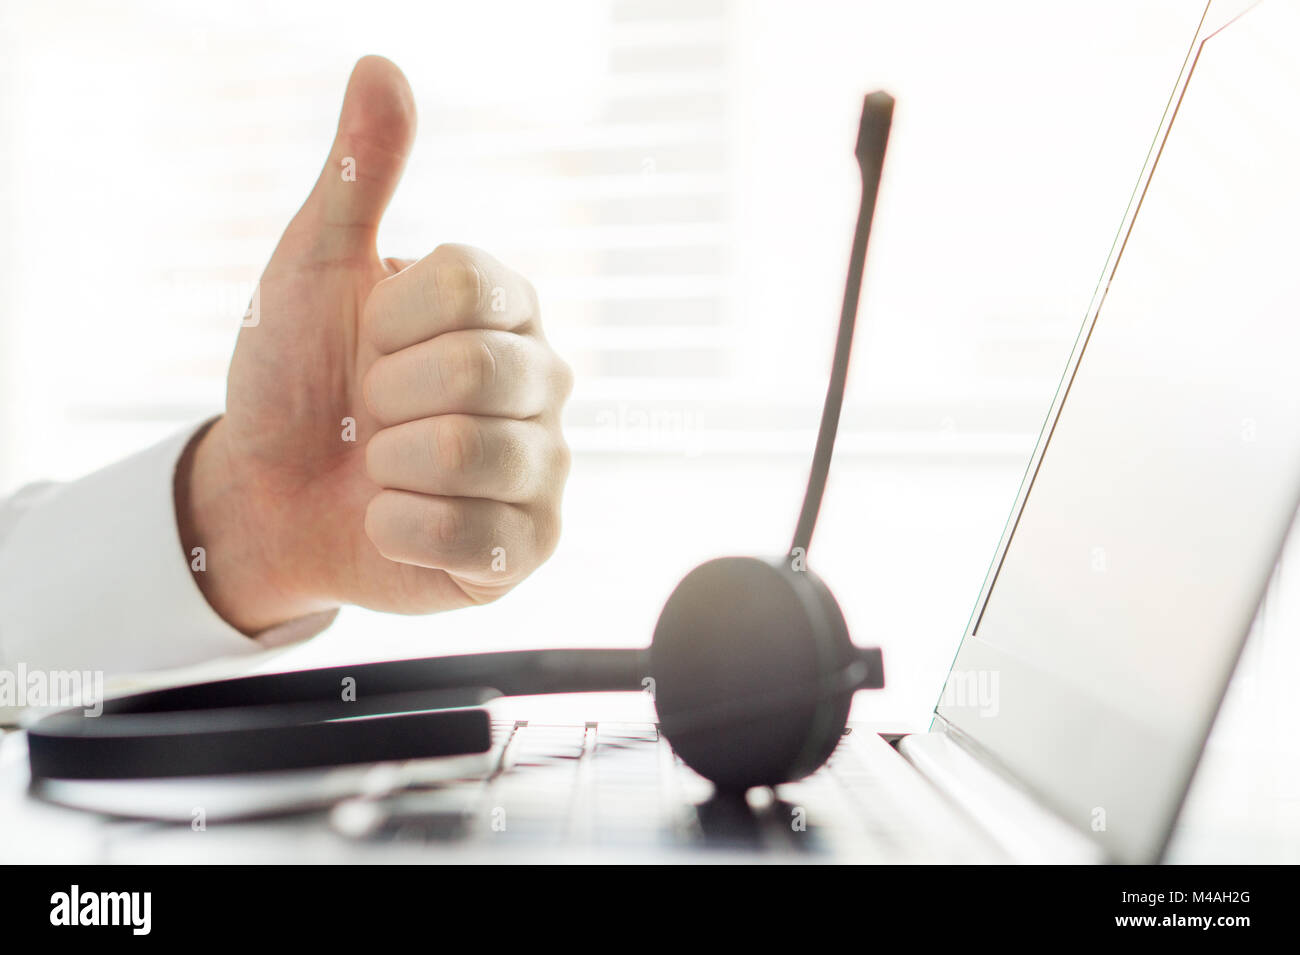 Happy help desk, support hotline or call center person showing thumbs up. Tele marketing professional getting sales. Good feedback. Stock Photo